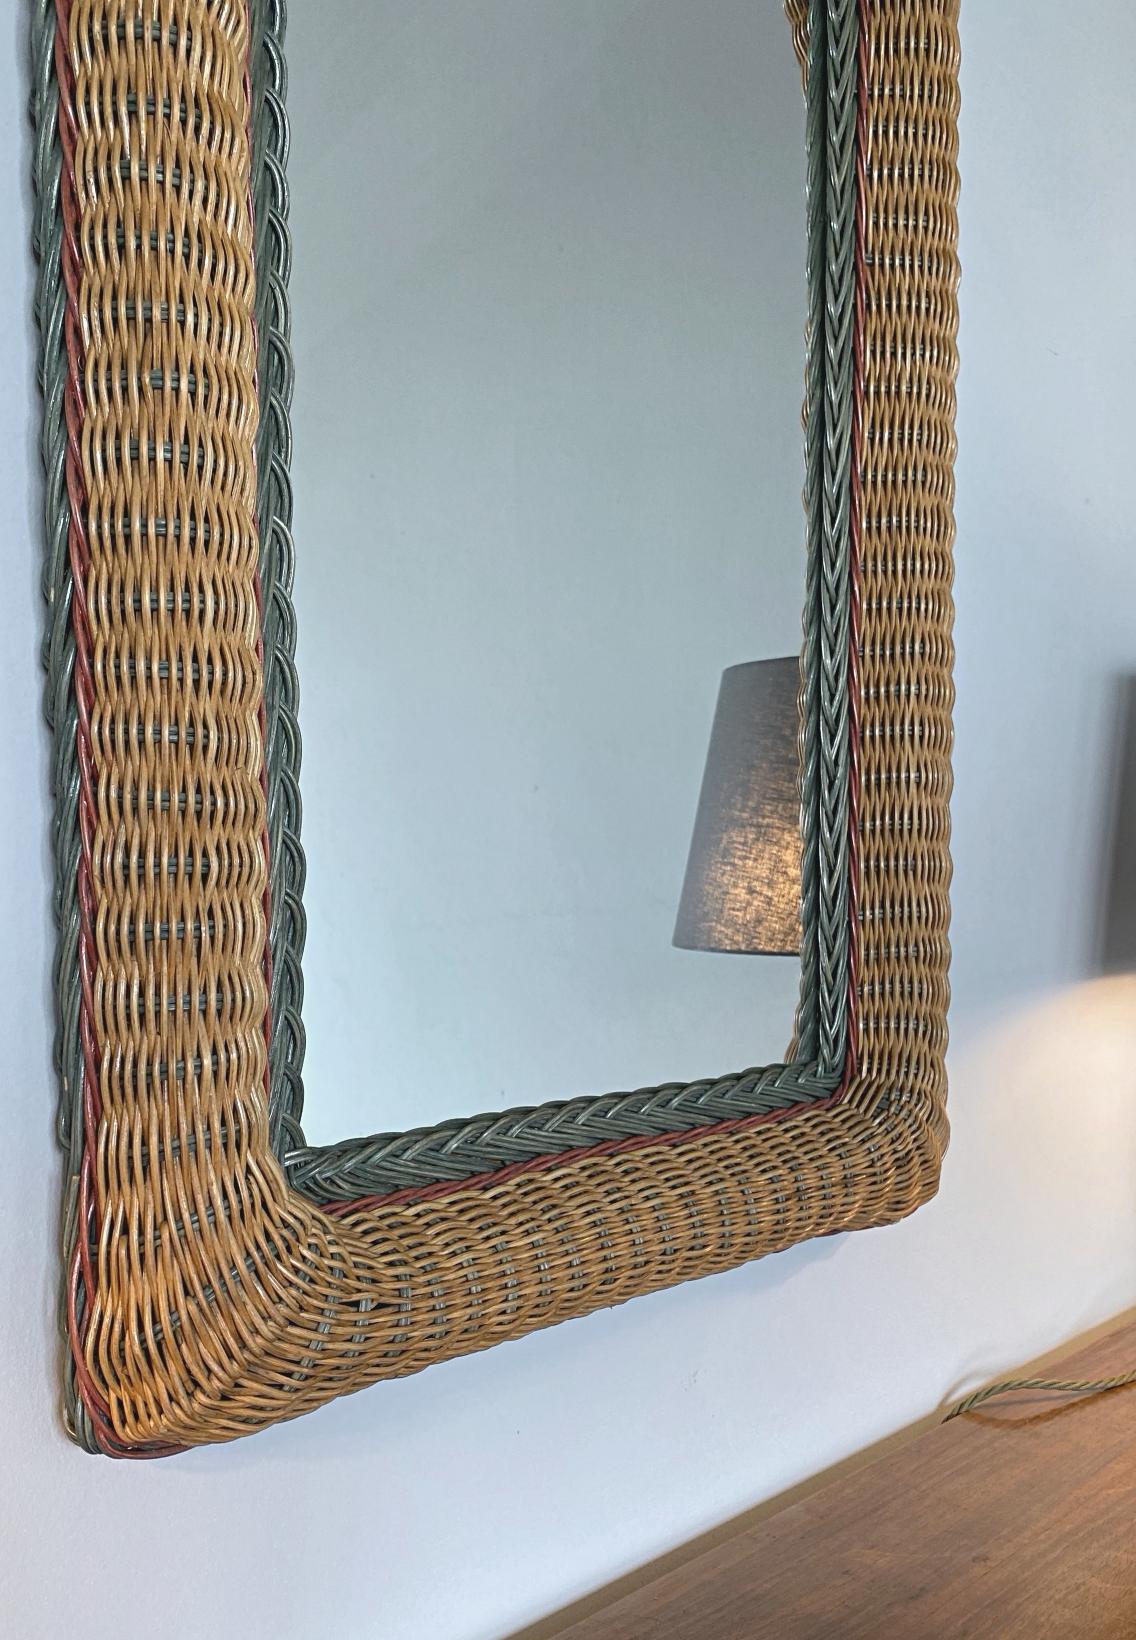 Hand-Crafted Artisanal Wicker Rattan Midcentury Arched Wall Mirror, 1960s, France